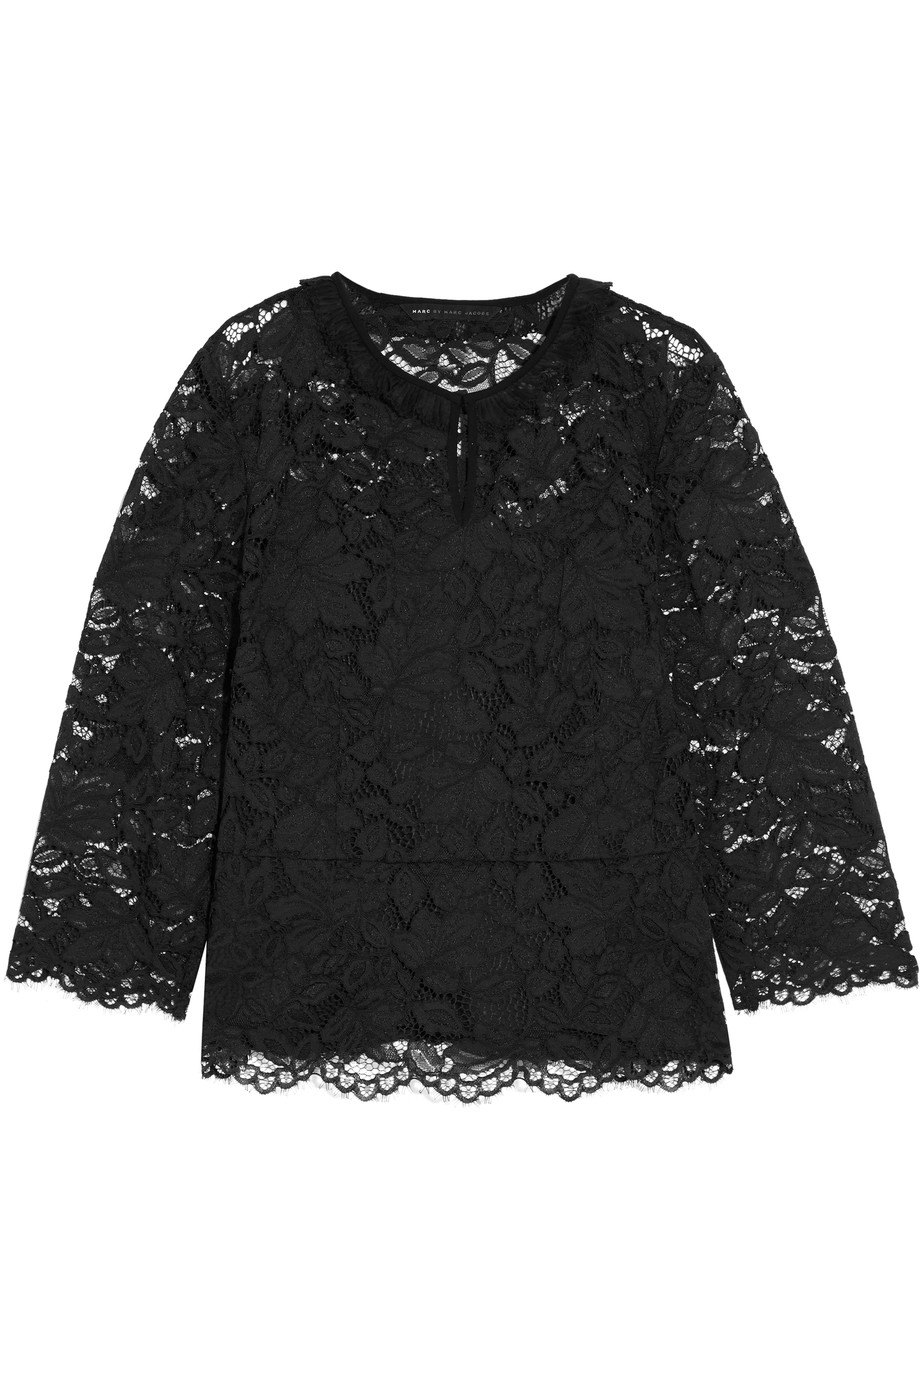 Marc By Marc Jacobs Corded Lace Top | ModeSens